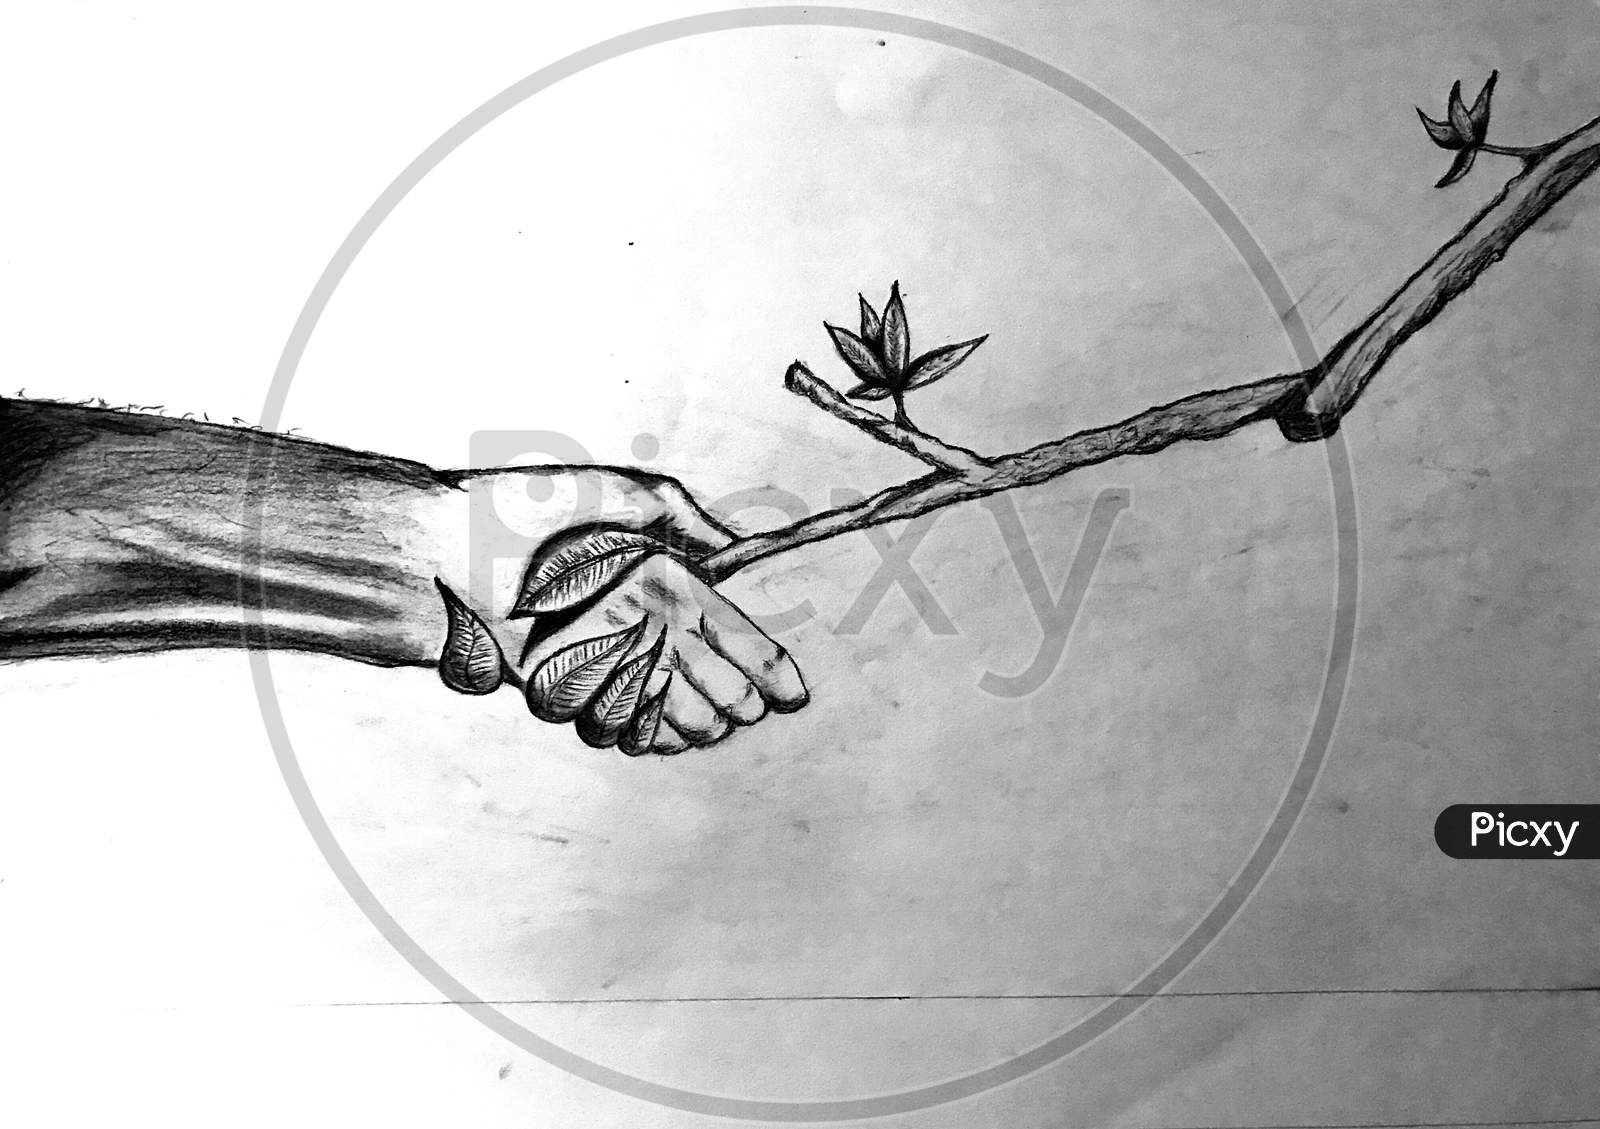 world nature day poster demonstrating a handshake between a human and a tree, showing connection between human and environment